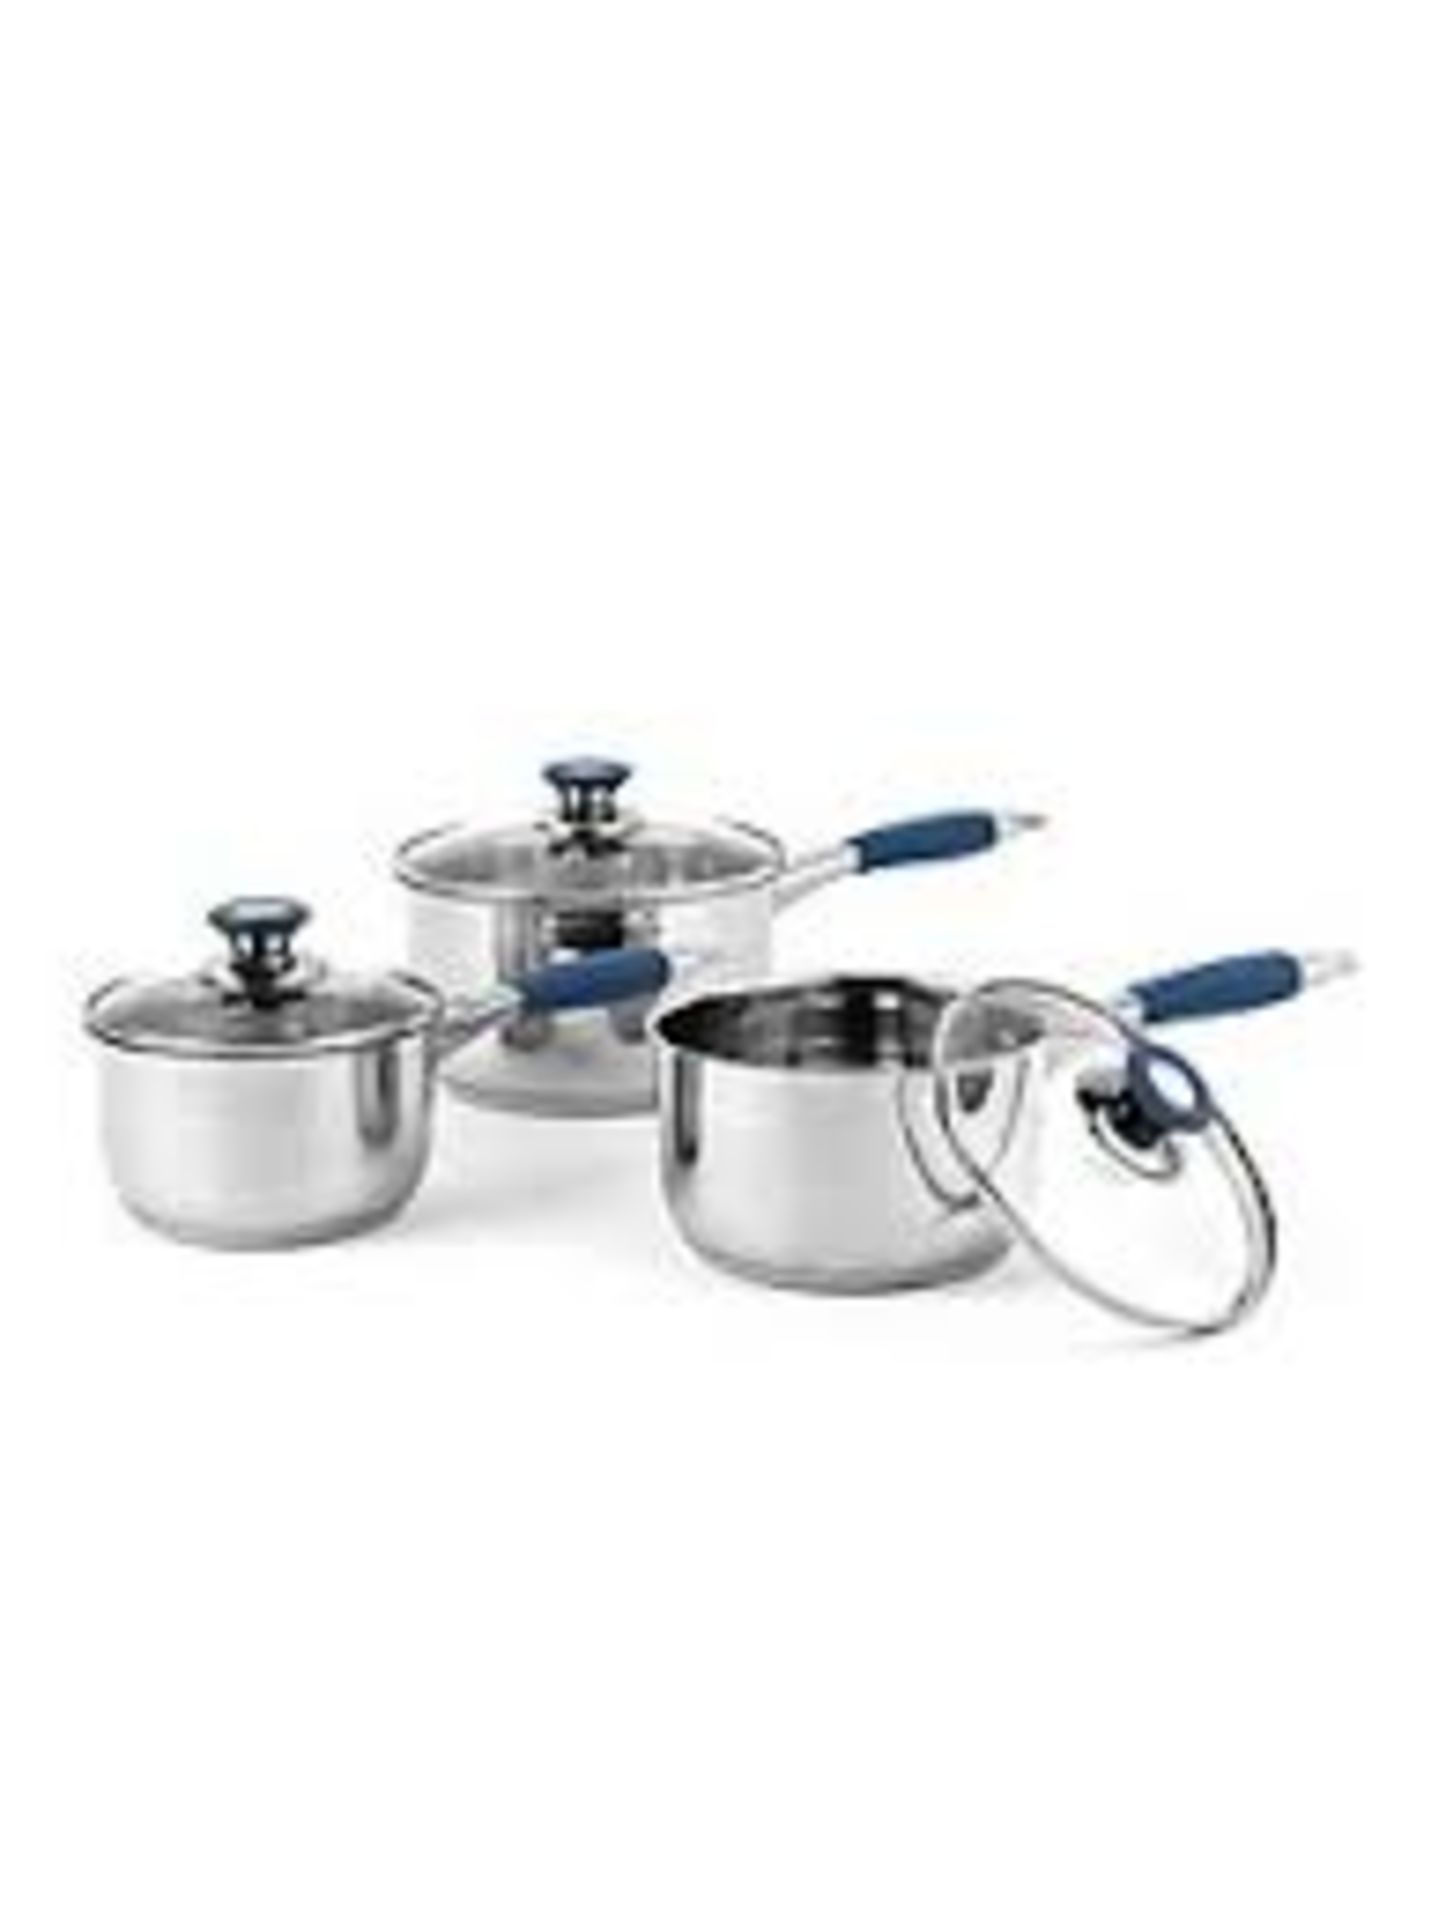 6 X BOXED SETS OF URBNCHEF 3 PIECE STAINLESS STEEL PAN SETS. EACH SET INCLUDES: 16CM SAUCE PAN